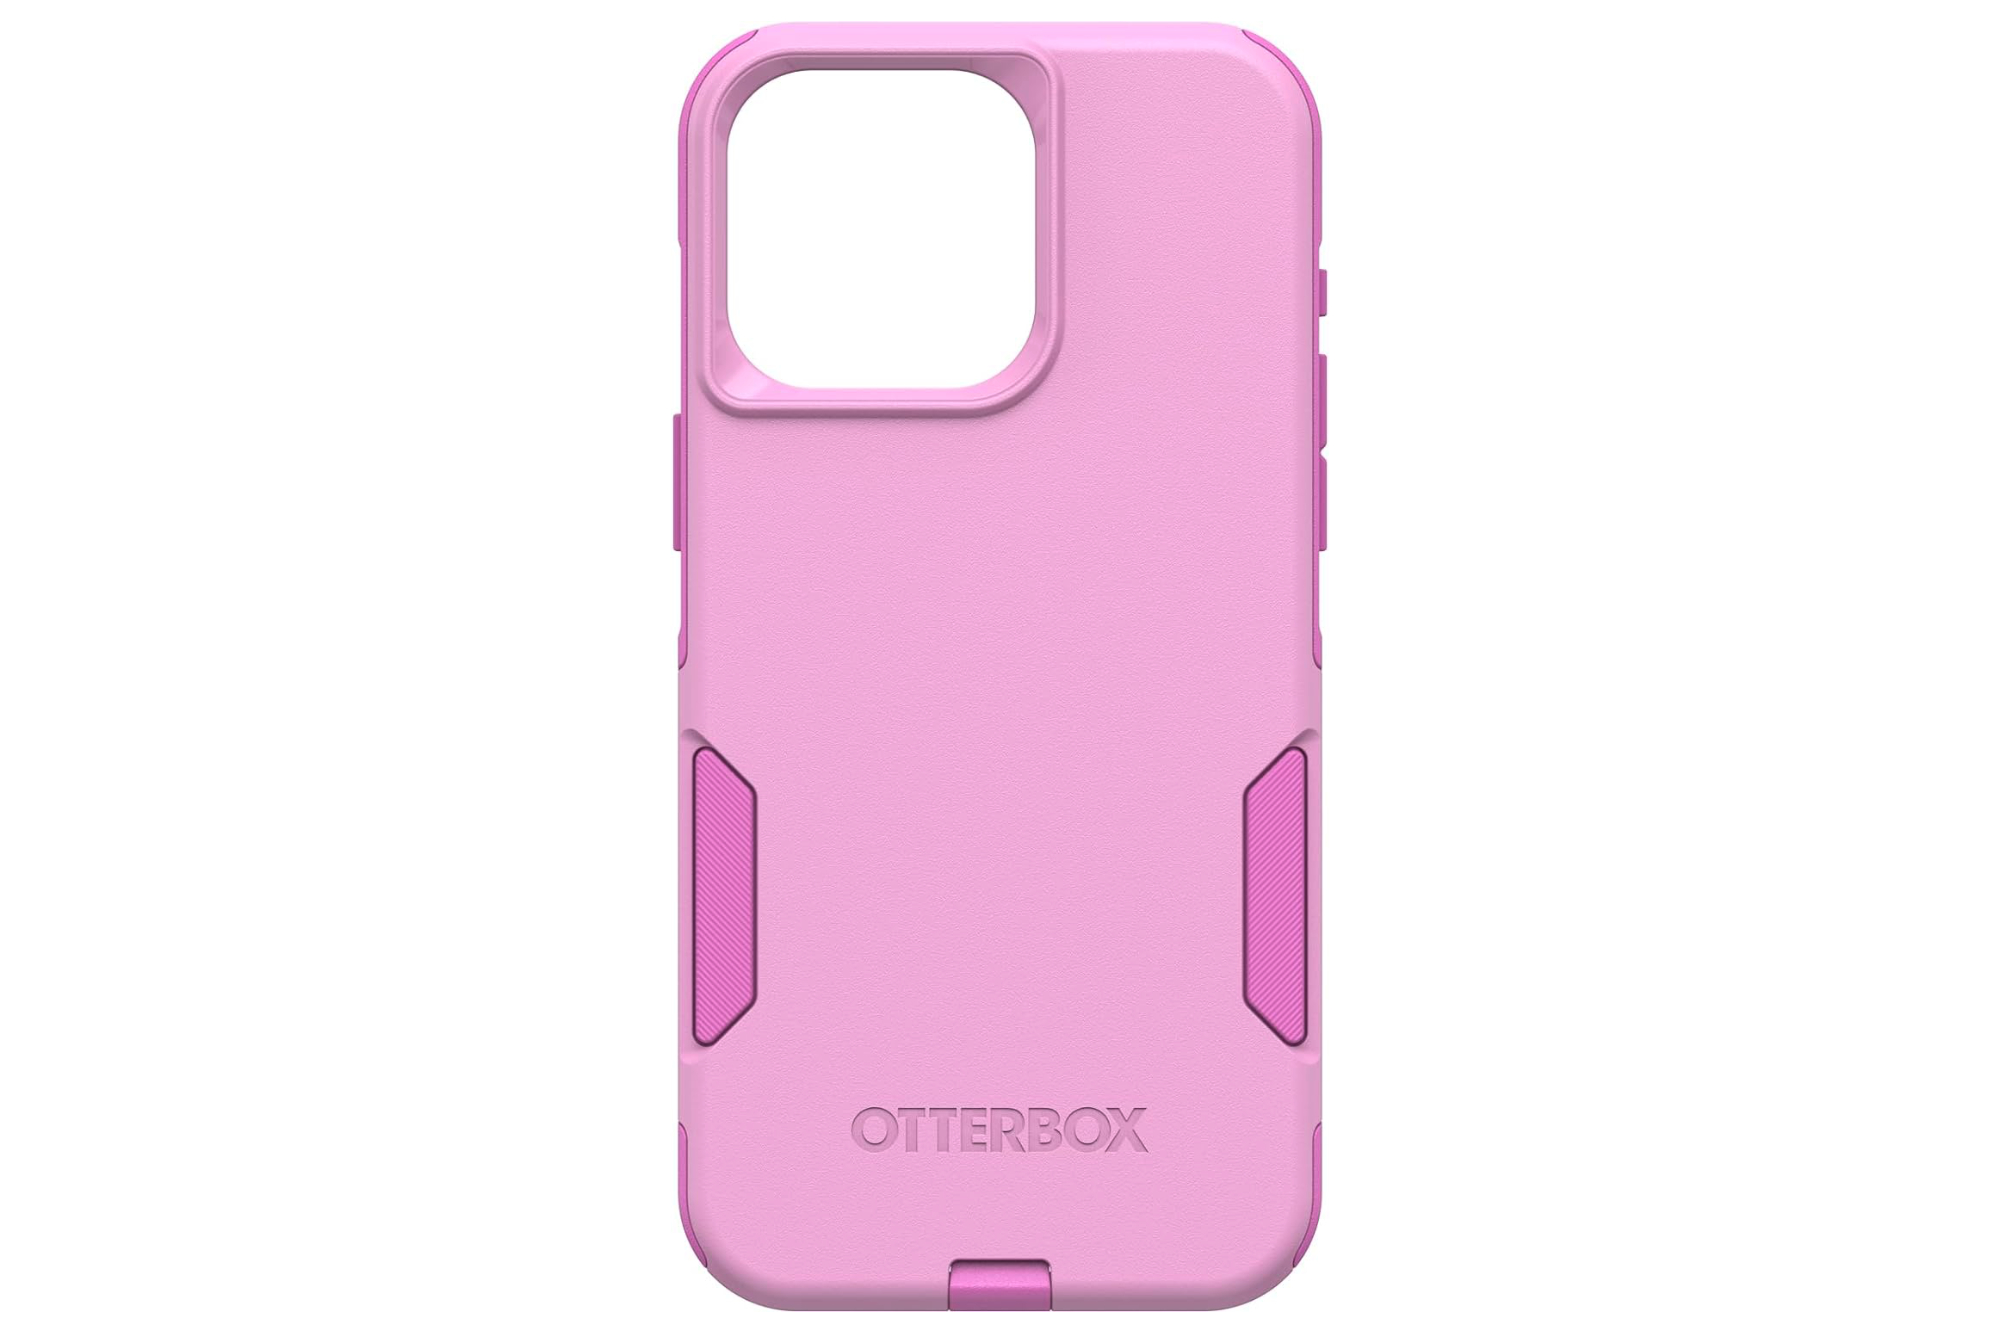  OtterBox - Ultra-Slim iPhone 13 Mini Case (ONLY) - Made for  Apple MagSafe, Artistic Protective Phone Case with Soft-Touch Material for  Comfort (Mercury Graphic) : Cell Phones & Accessories